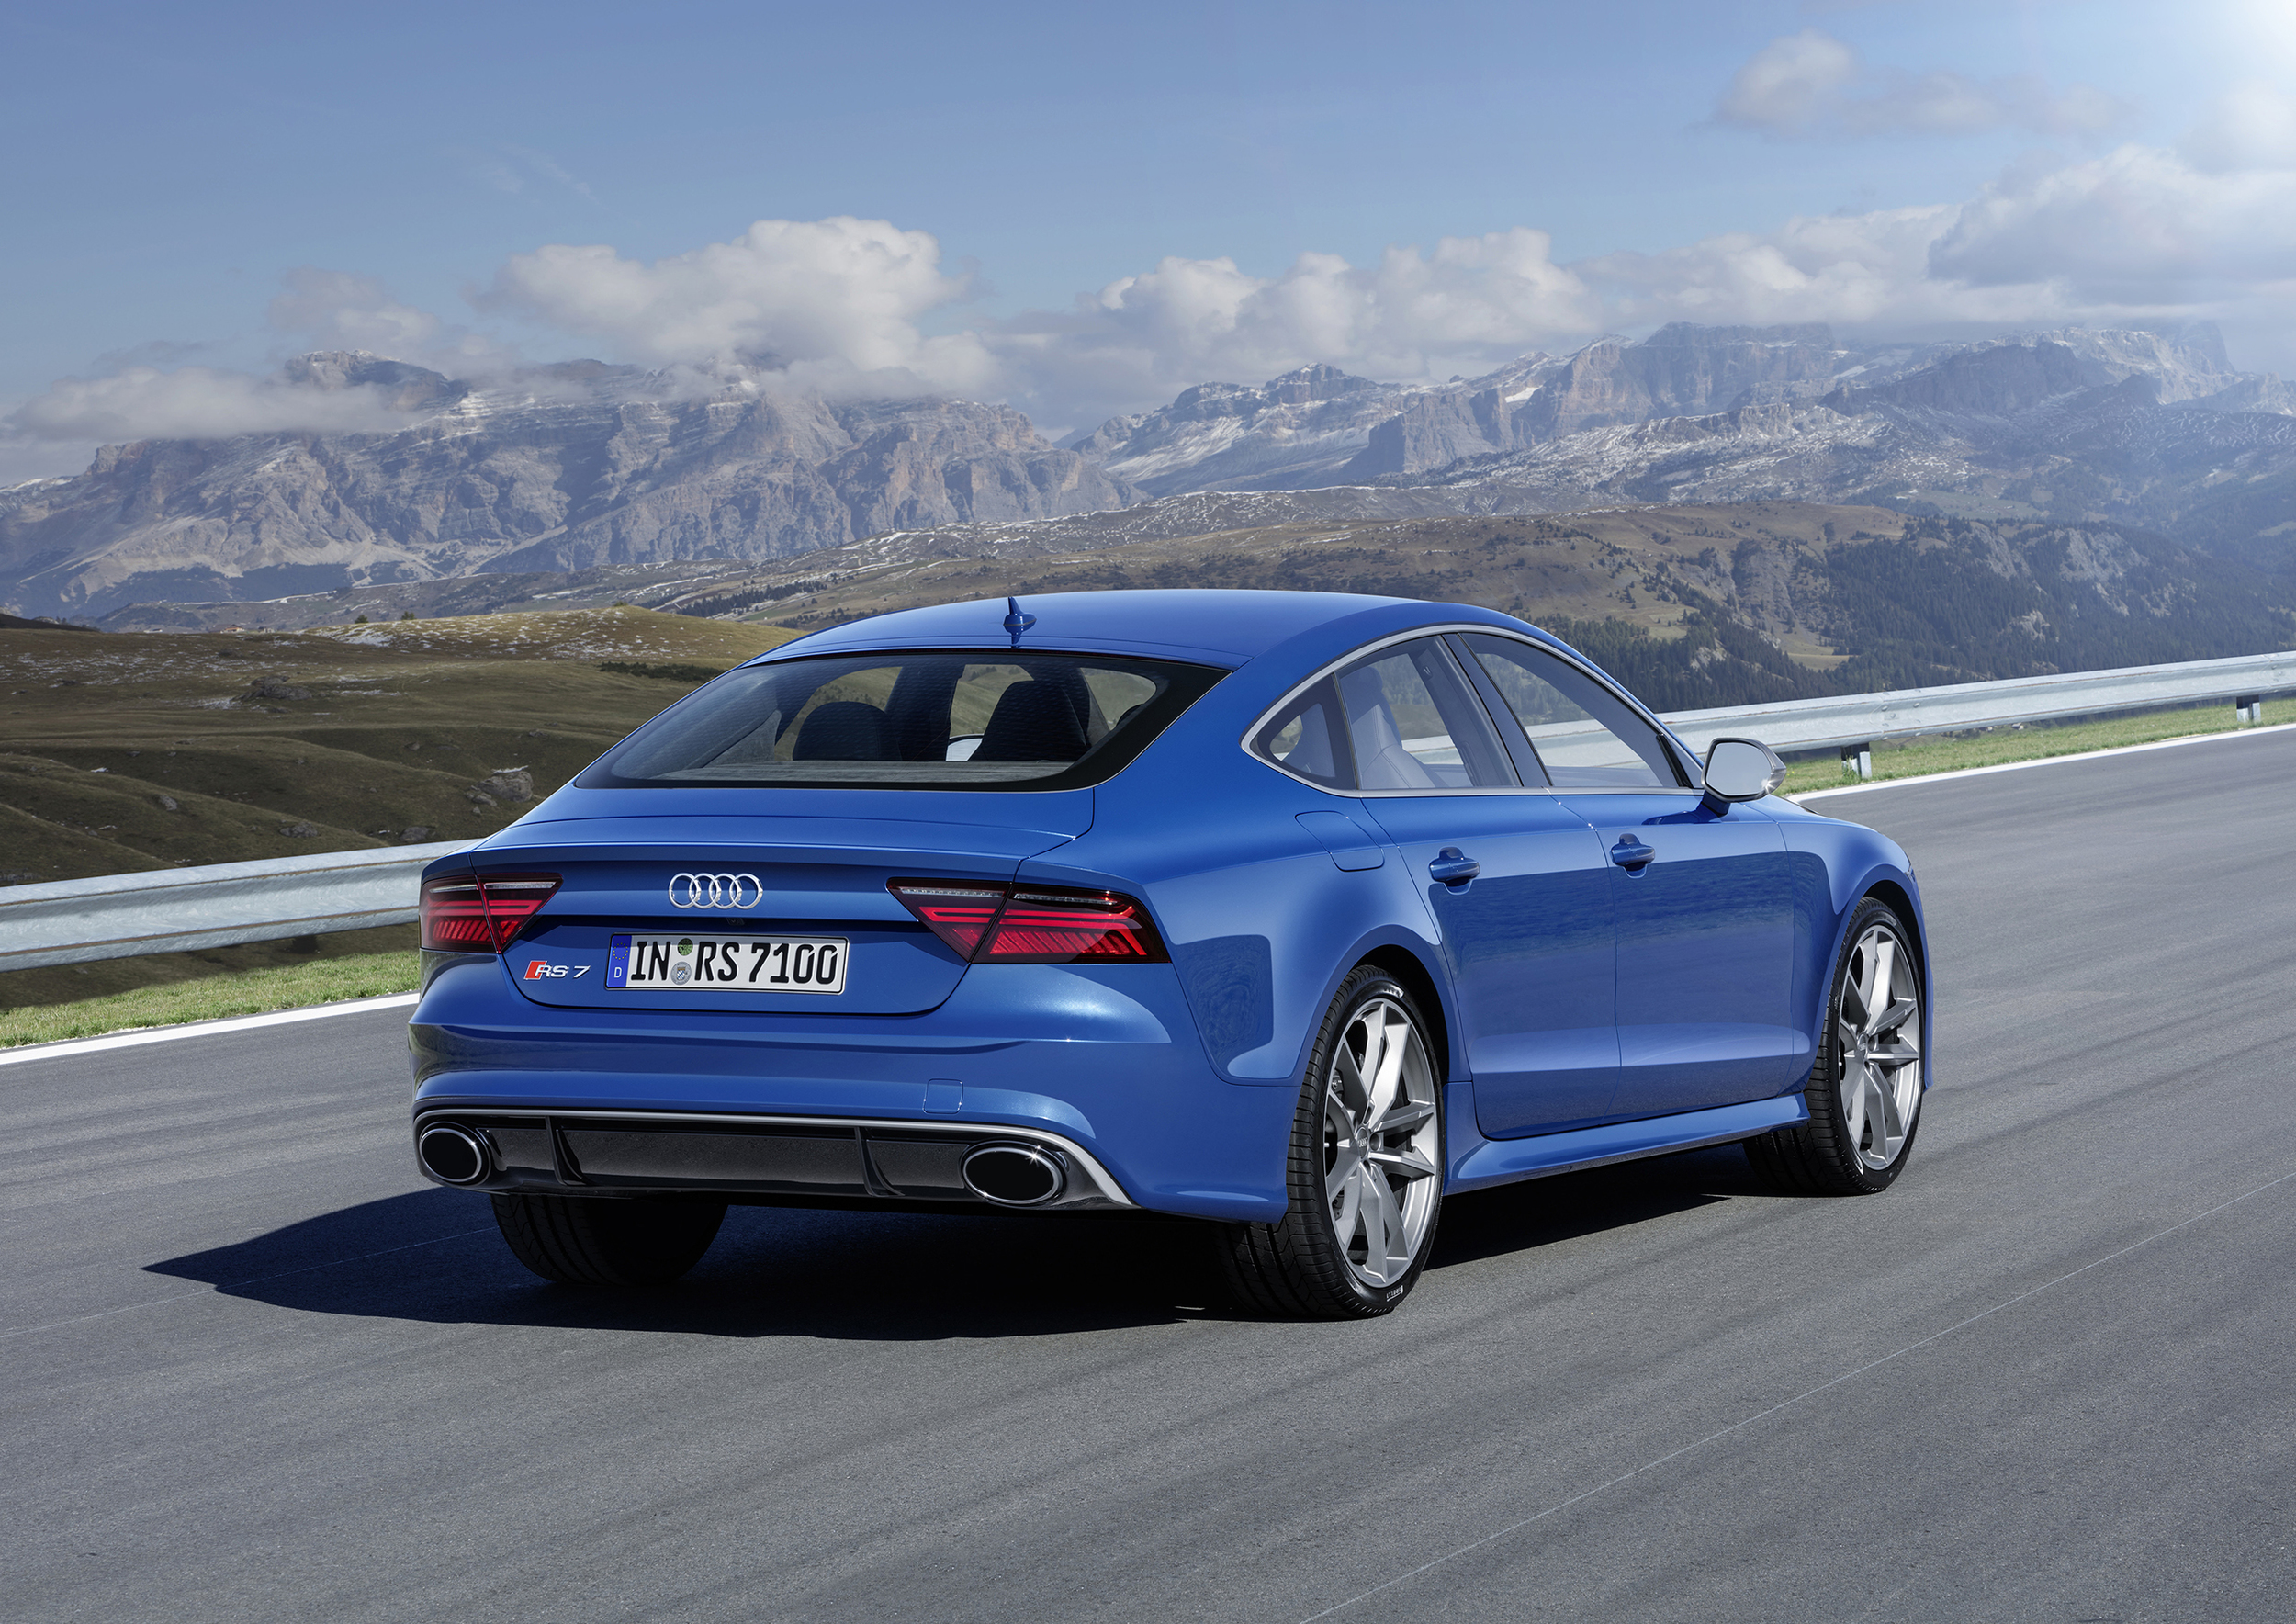 Audi unveils new RS 6 and RS 7 performance variants